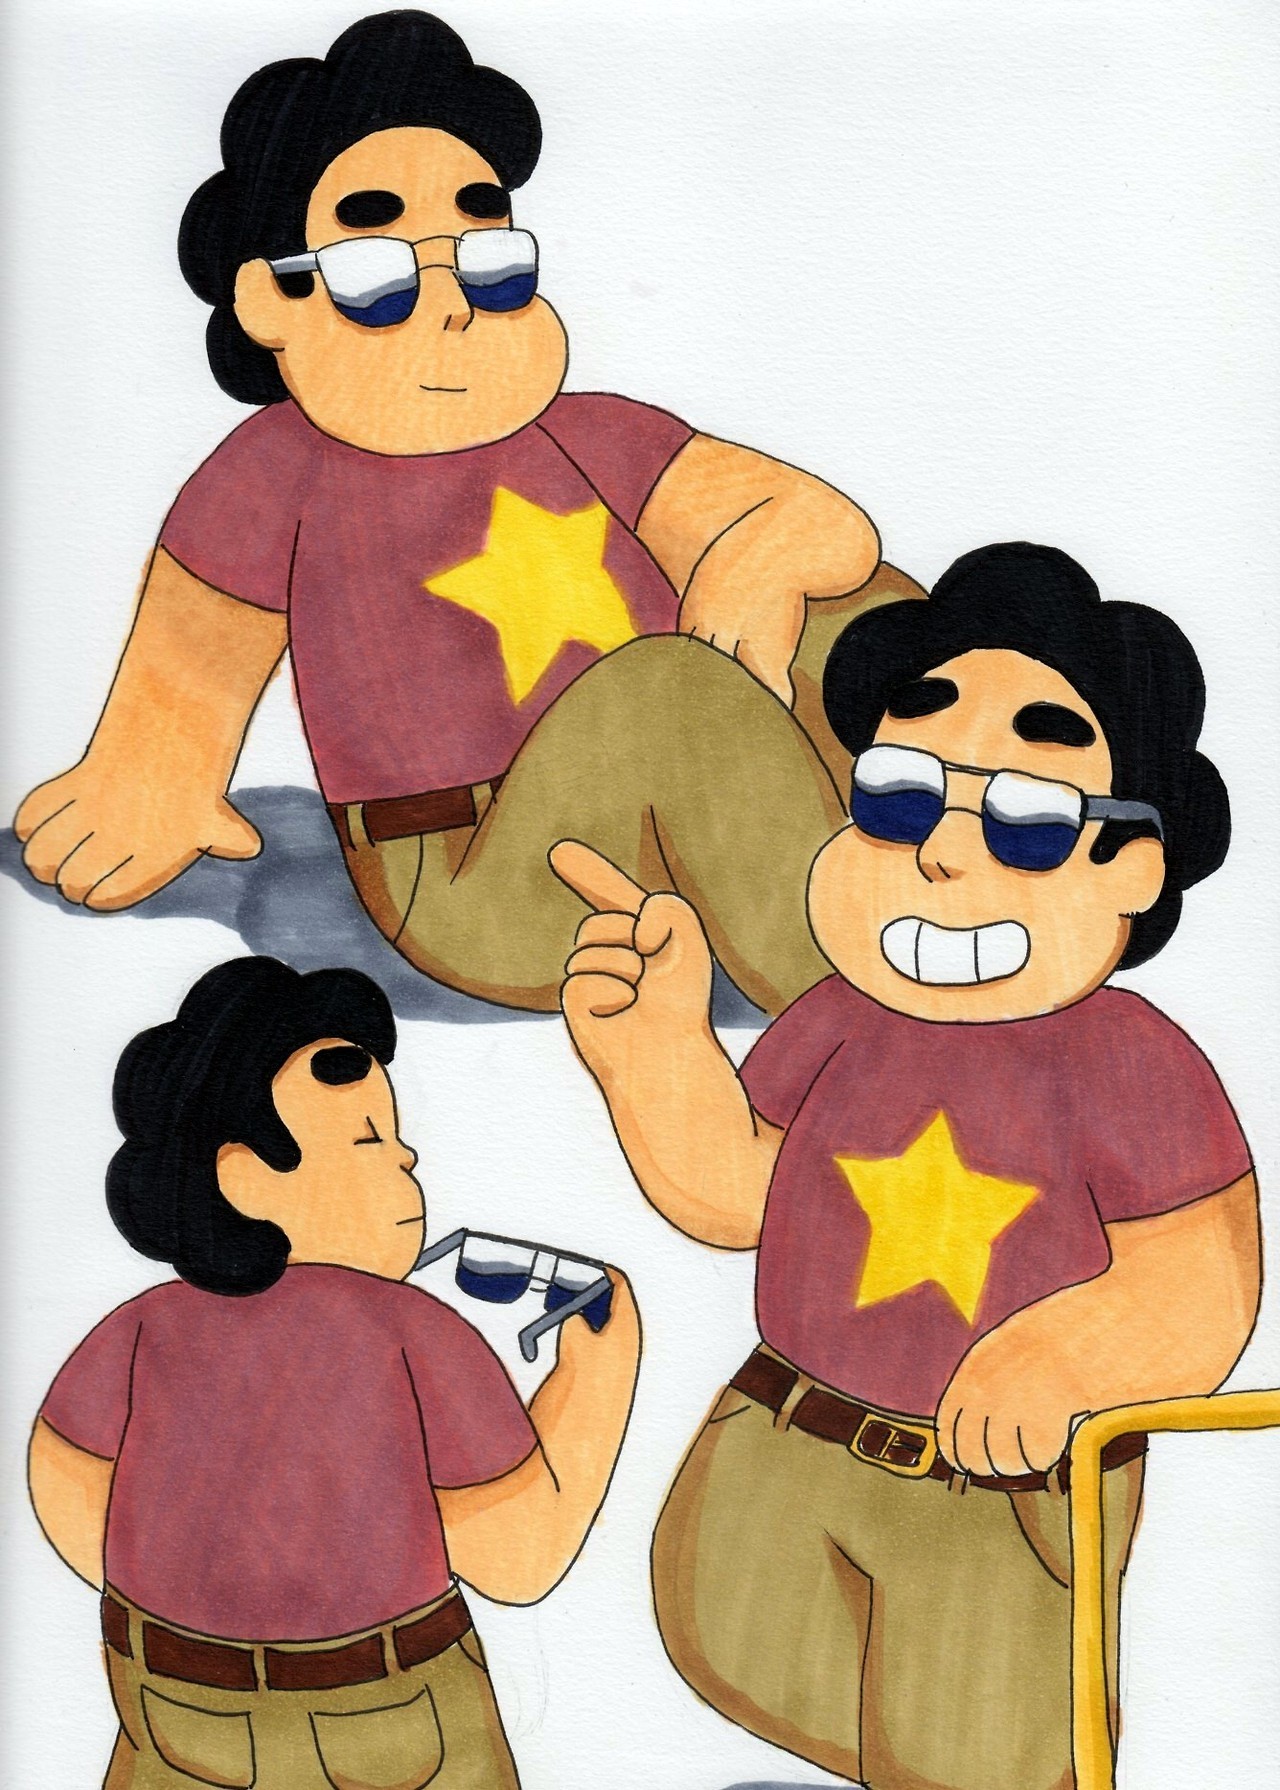 Yes Steven, you ARE a distinguished boy and you DO deserve distinguished khakis